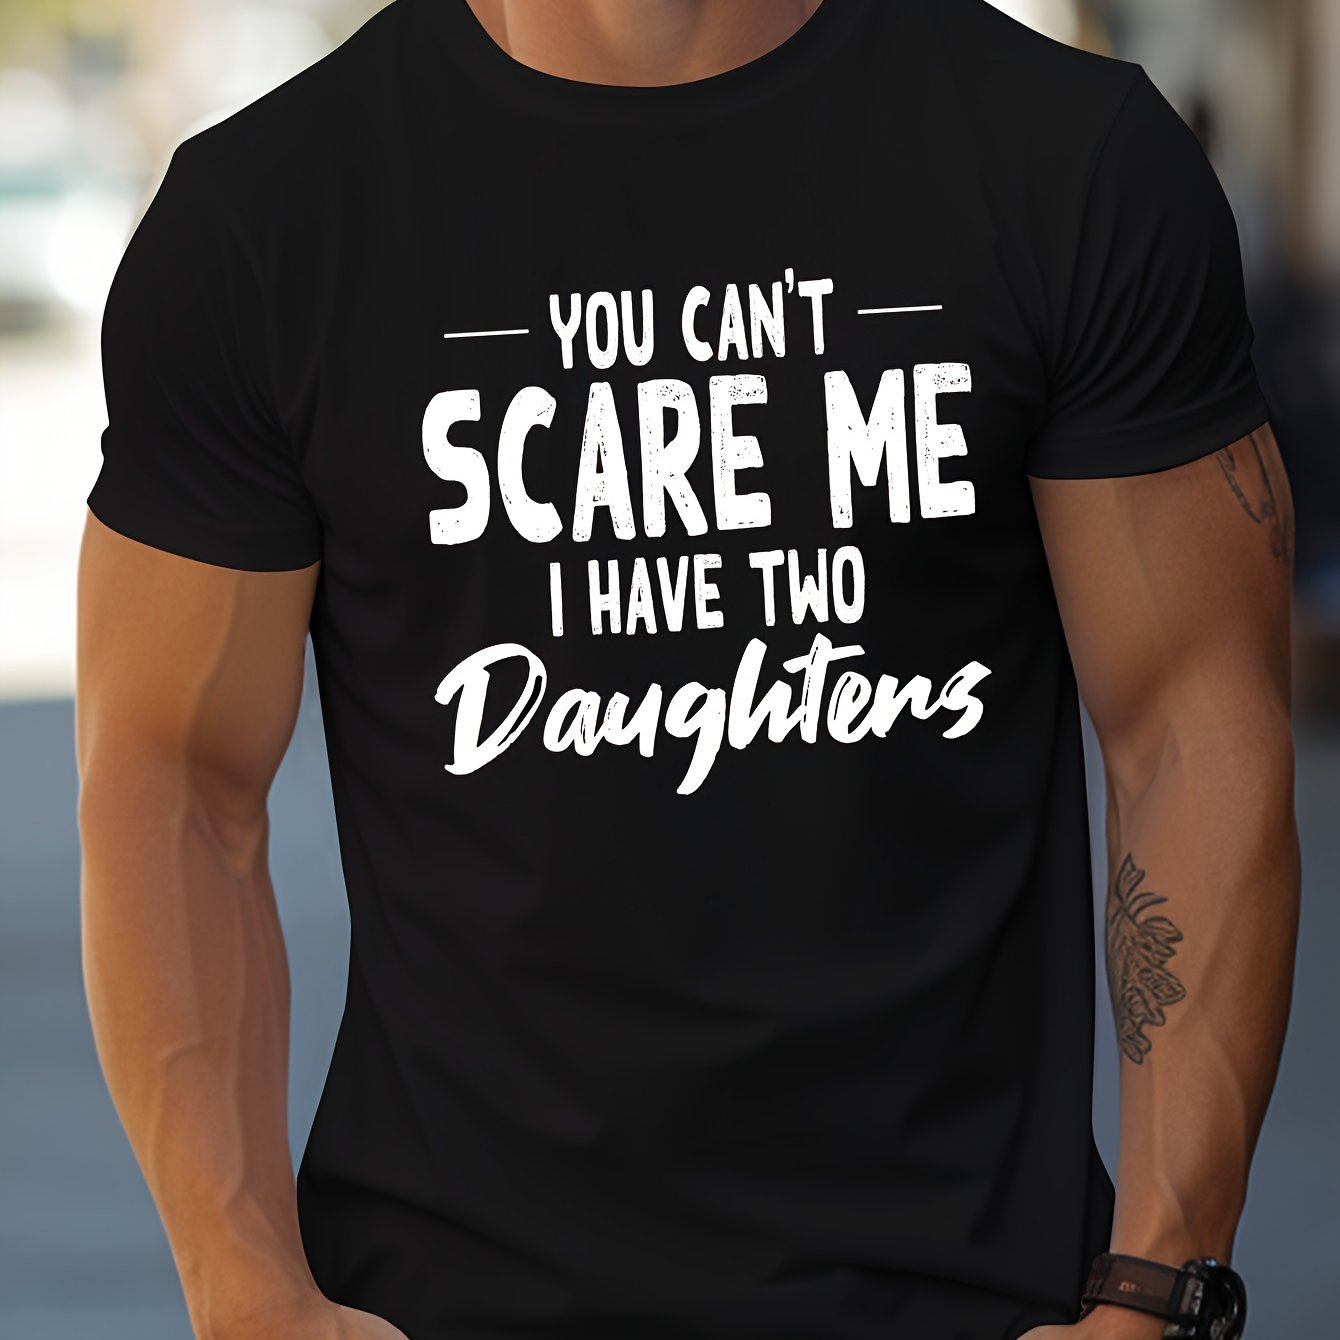 YOU CAN'T SCARE ME I HAVE TWO DAUGHTERS Print, Men's Novel Graphic Design T-shirt, Casual Comfy Tees For Summer, Men's Clothing Tops For Daily Activities